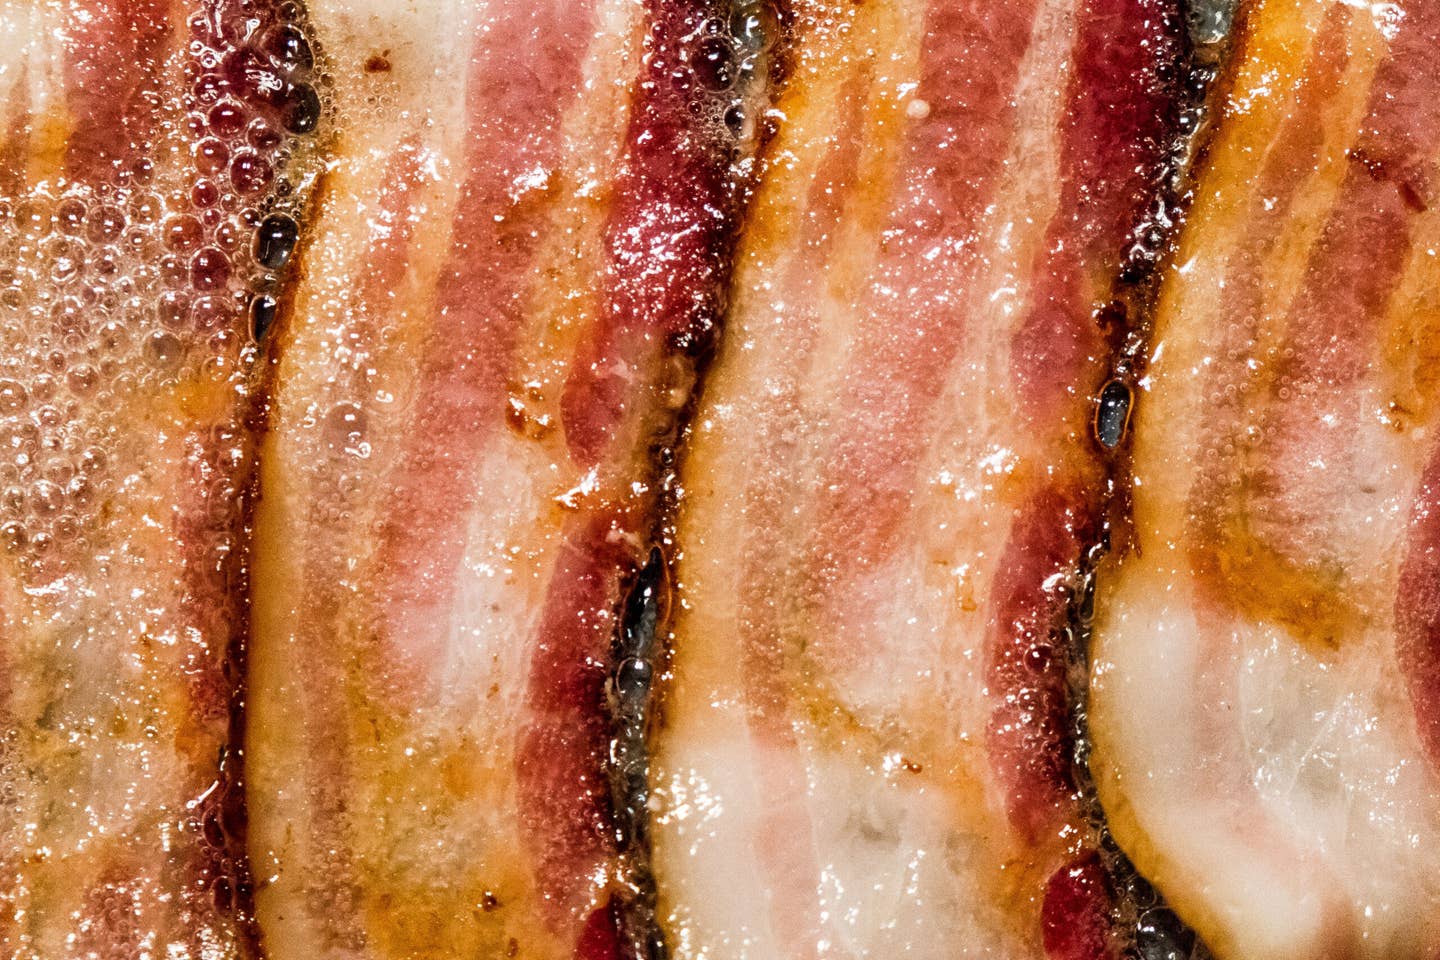 How to Make Oven-Fried Bacon